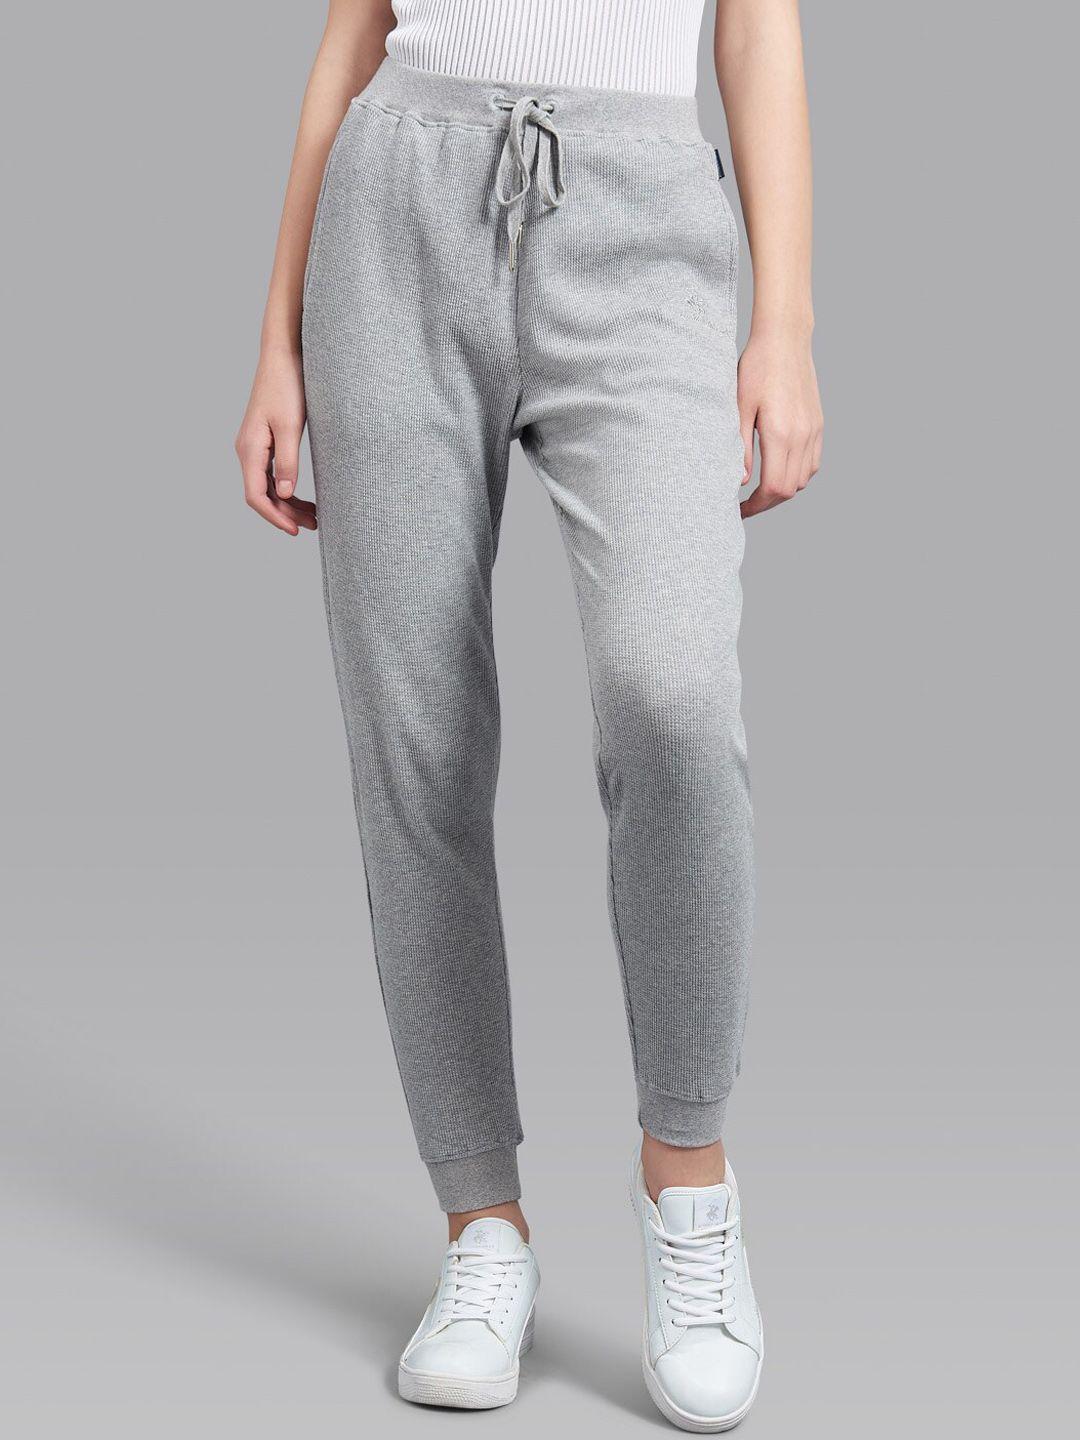 beverly hills polo club women grey solid joggers